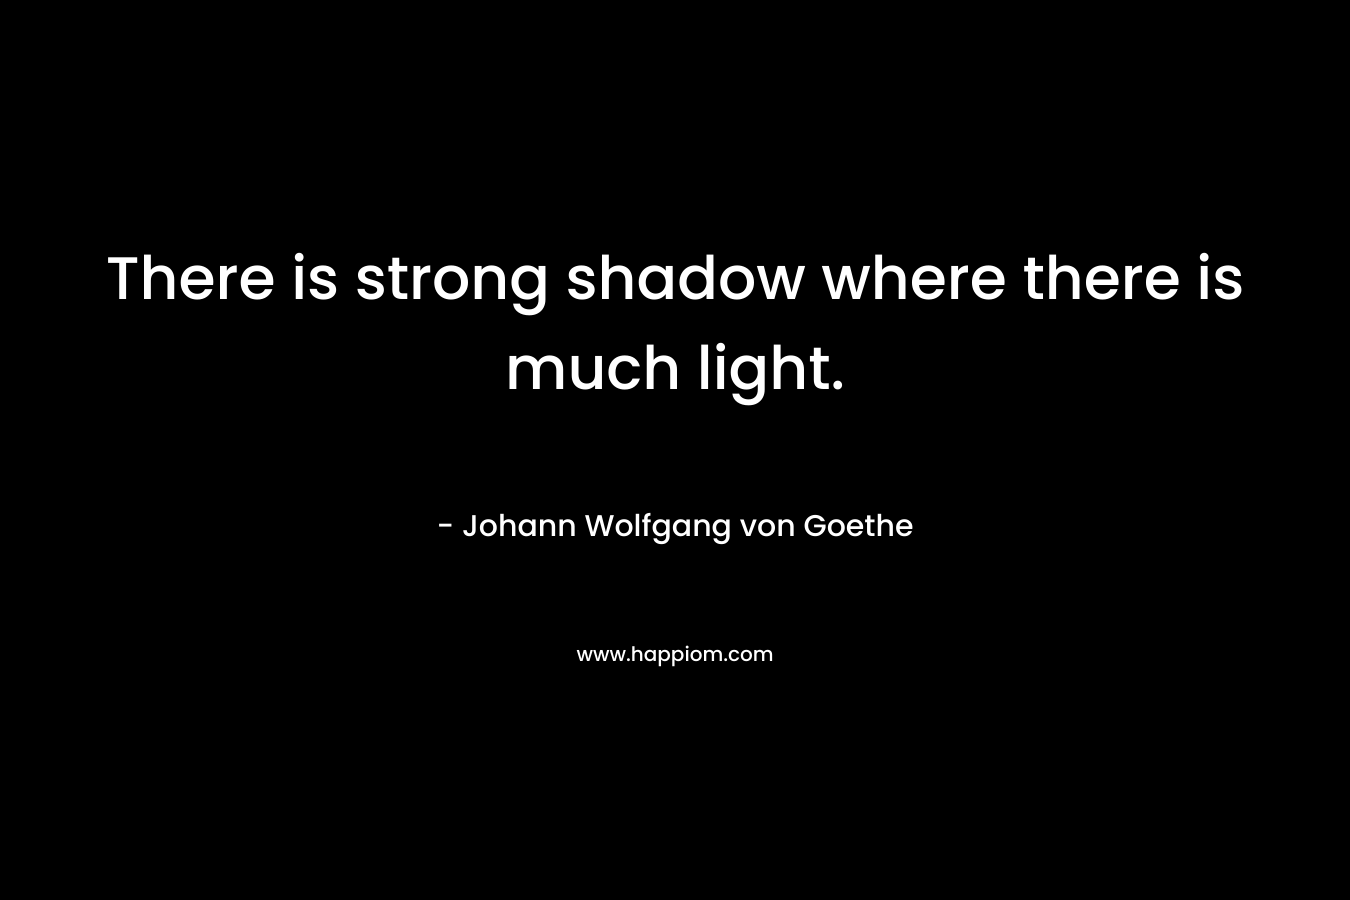 There is strong shadow where there is much light.